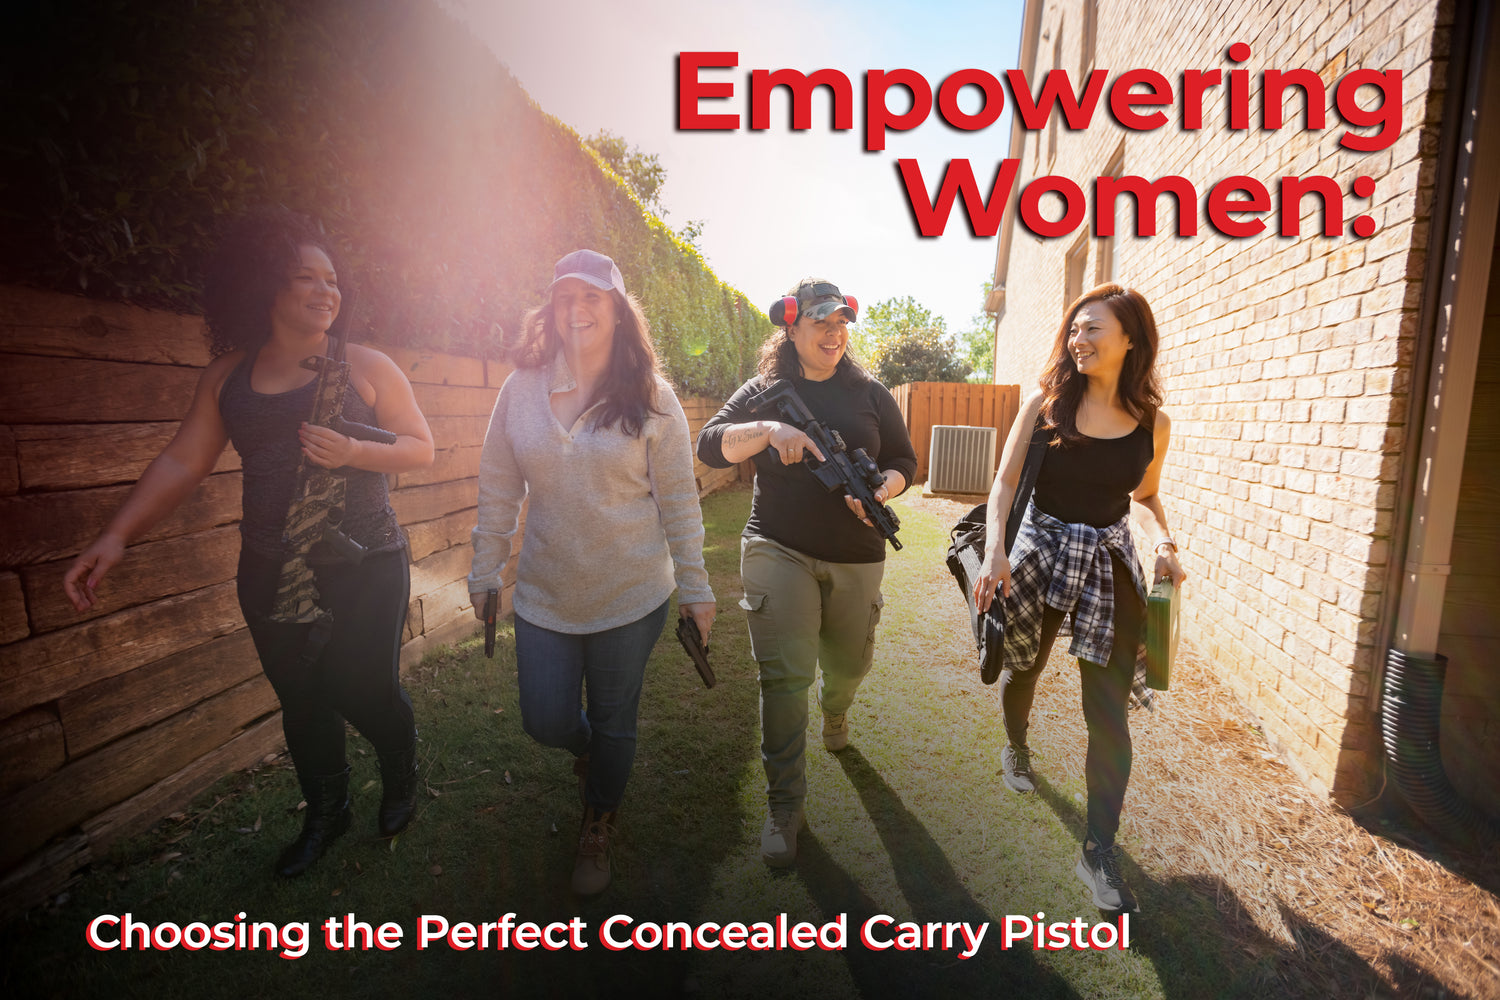 Empowering Women: Choosing the Perfect Concealed Carry Pistol